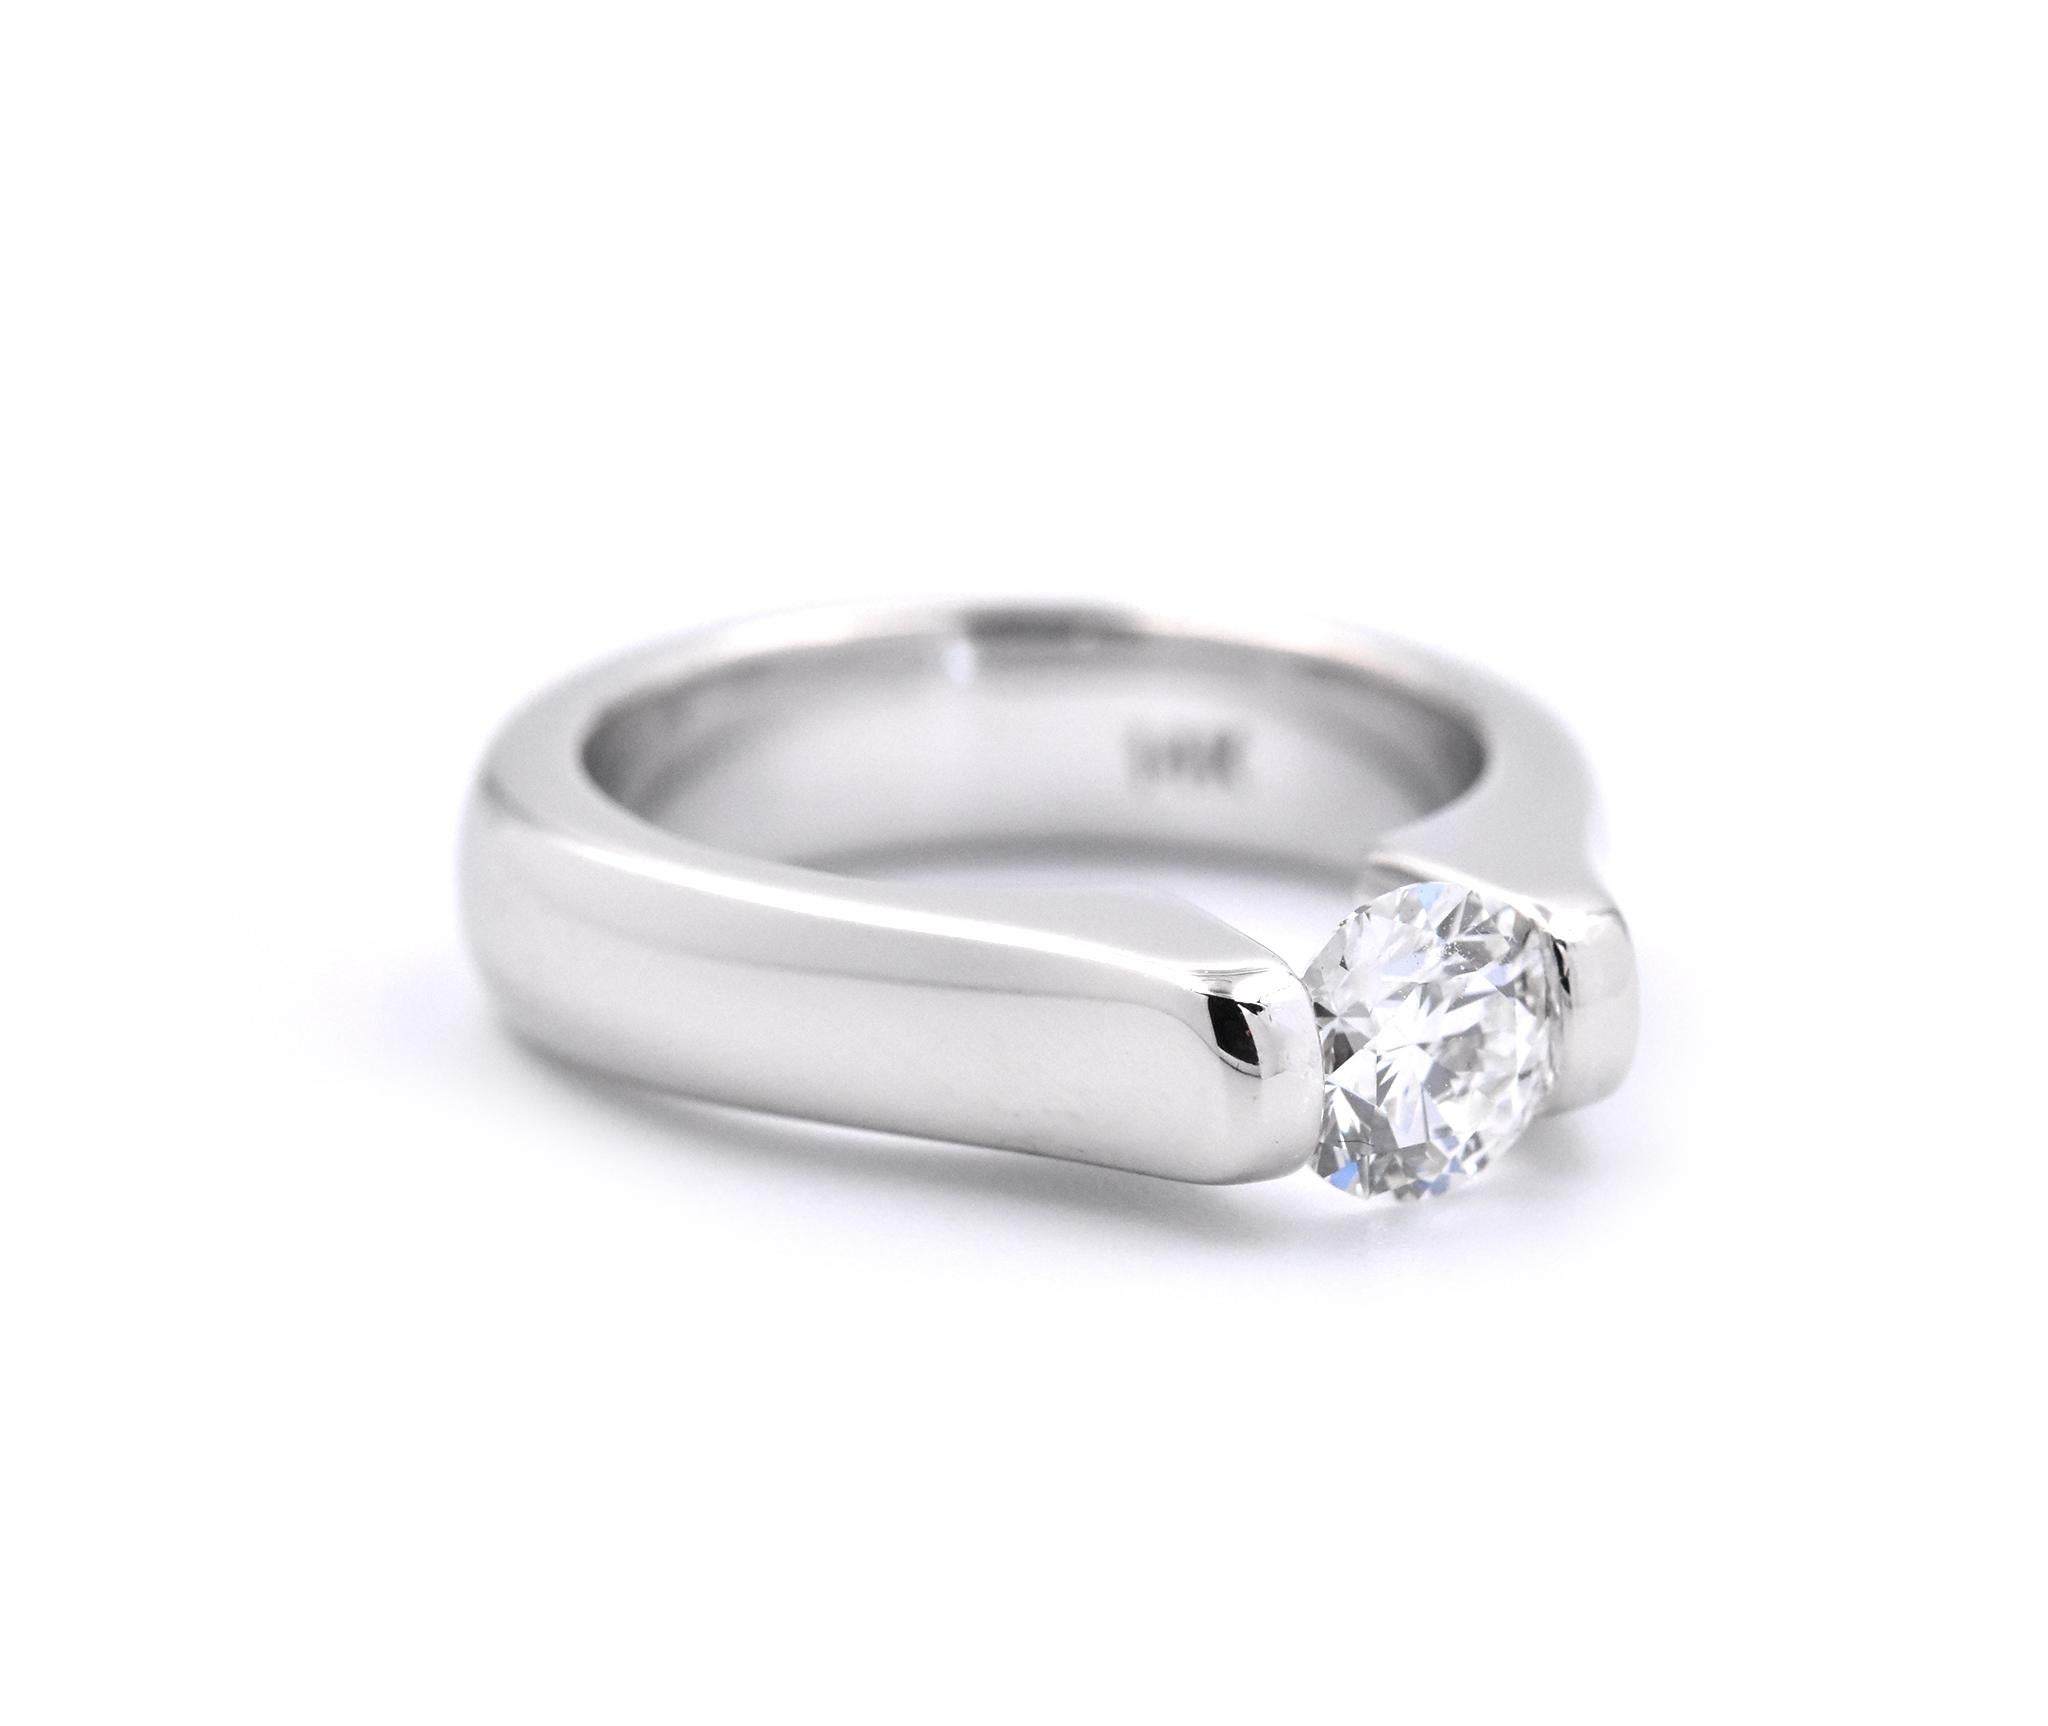 Designer: custom design
Material: 14k white gold
Center Diamond: 1 round brilliant cut = 0.75ct
Color: H
Clarity: VS1
Ring Size: 6 ¼ (please allow two additional shipping days for sizing requests)
Dimensions: ring measures 5.20mm wide
Weight: 9.35